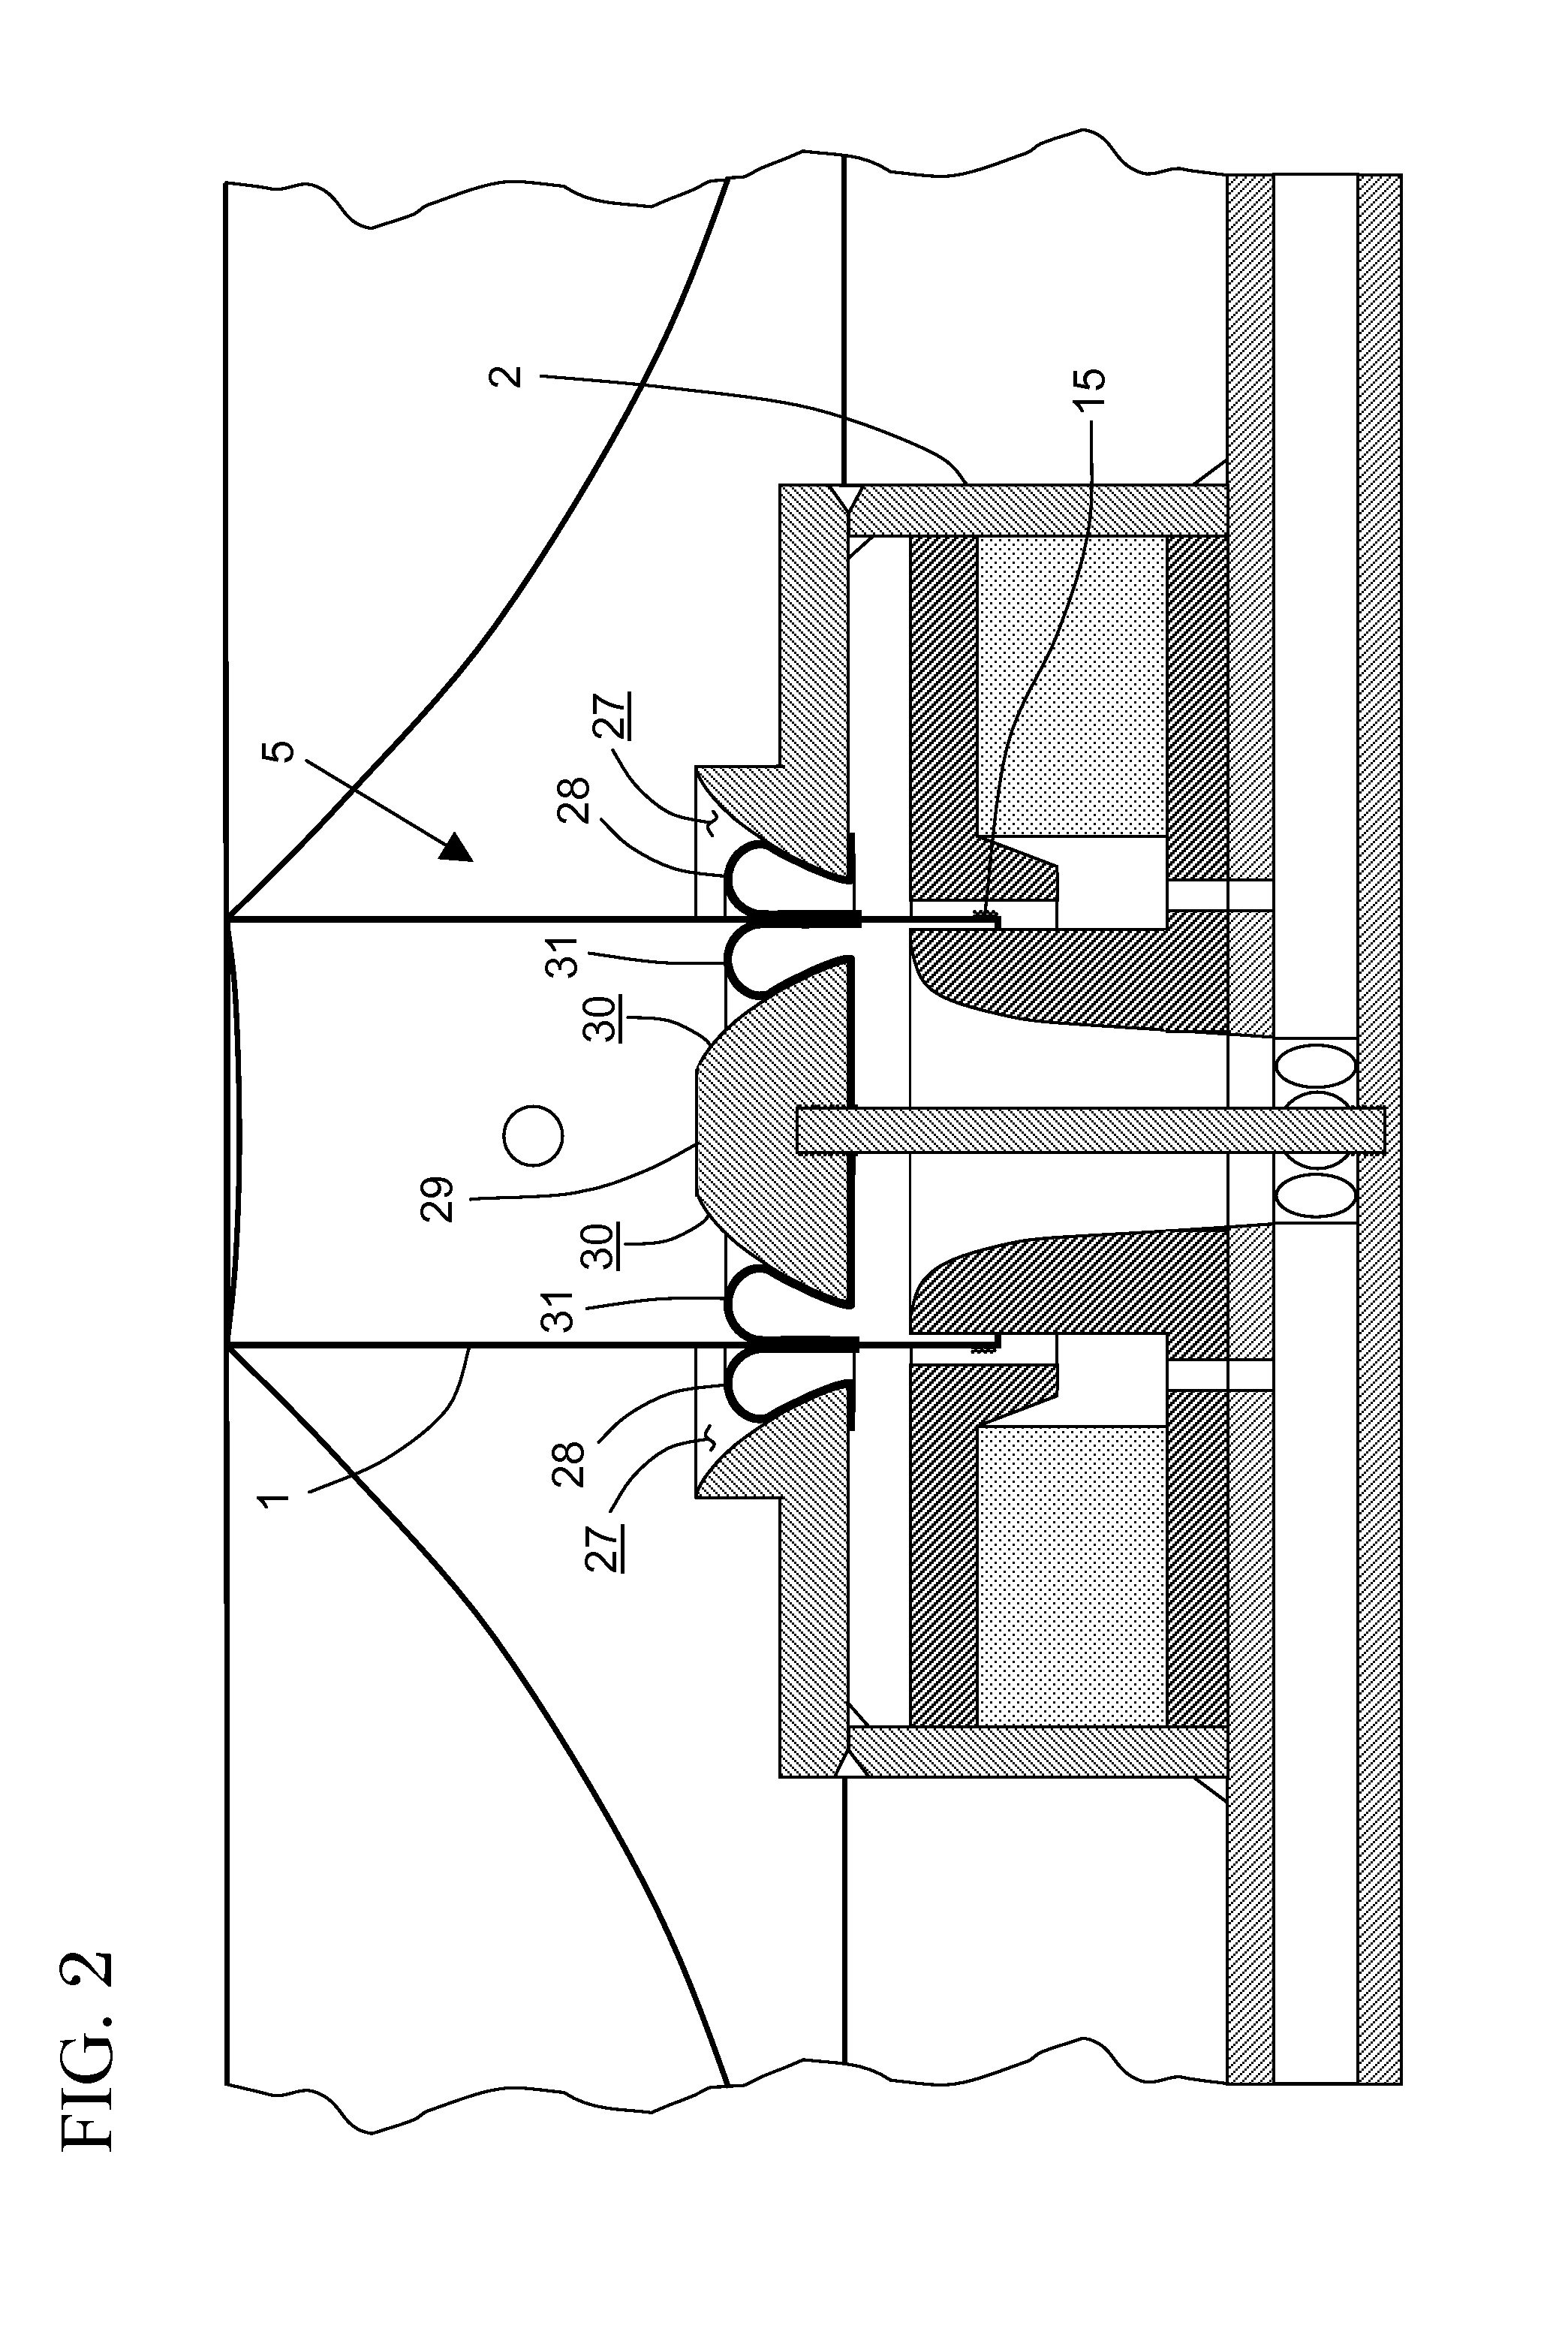 Acoustic actuator and passive attenuator incorporating a lightweight acoustic diaphragm with an ultra low resonant frequency coupled with a shallow enclosure of small volume